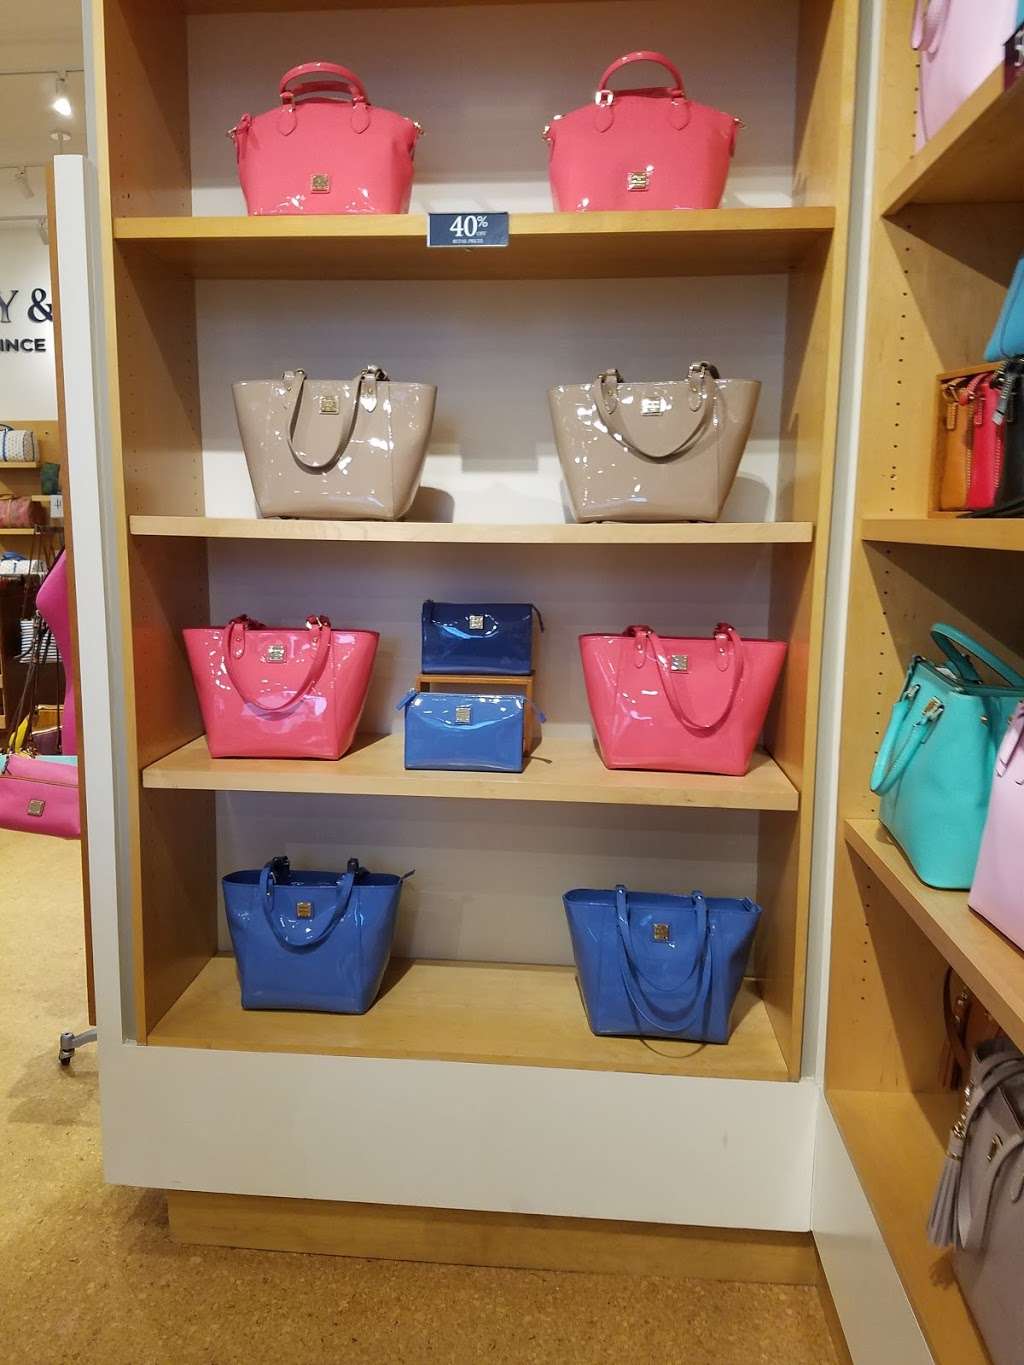 Dooney & Bourke Factory Store | 203 Red Apple Ct #203, Central Valley, NY 10917, USA | Phone: (845) 928-8814